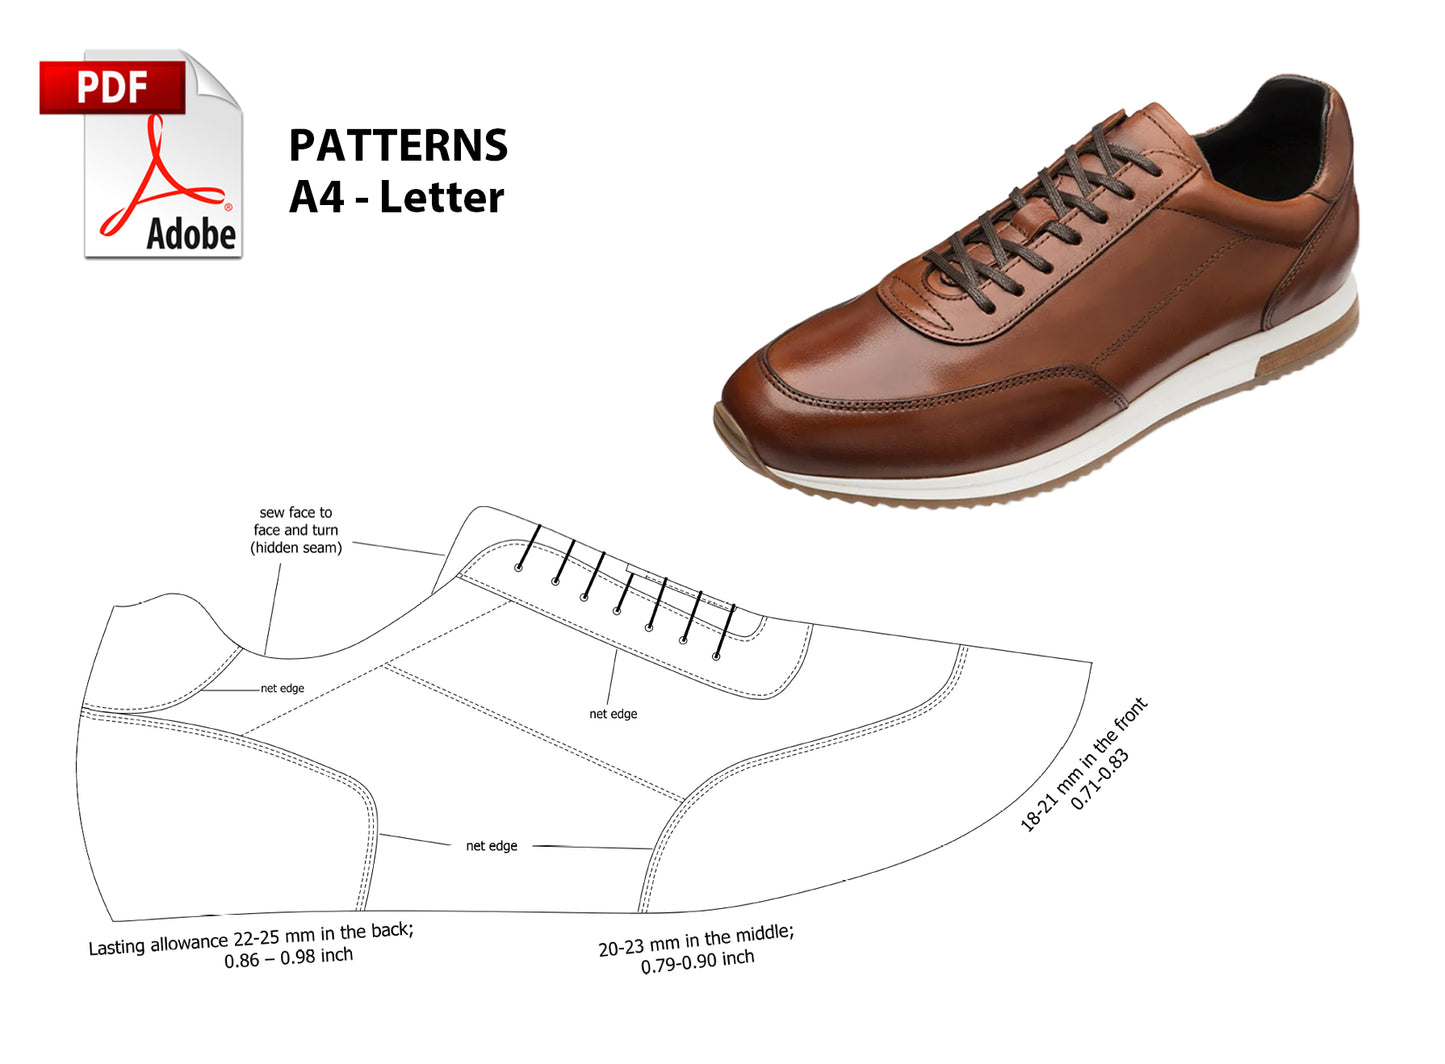 Digital Pattern shoes A4 - Letter PDF, Men Sneakers Casual Runner, all 9 sizes